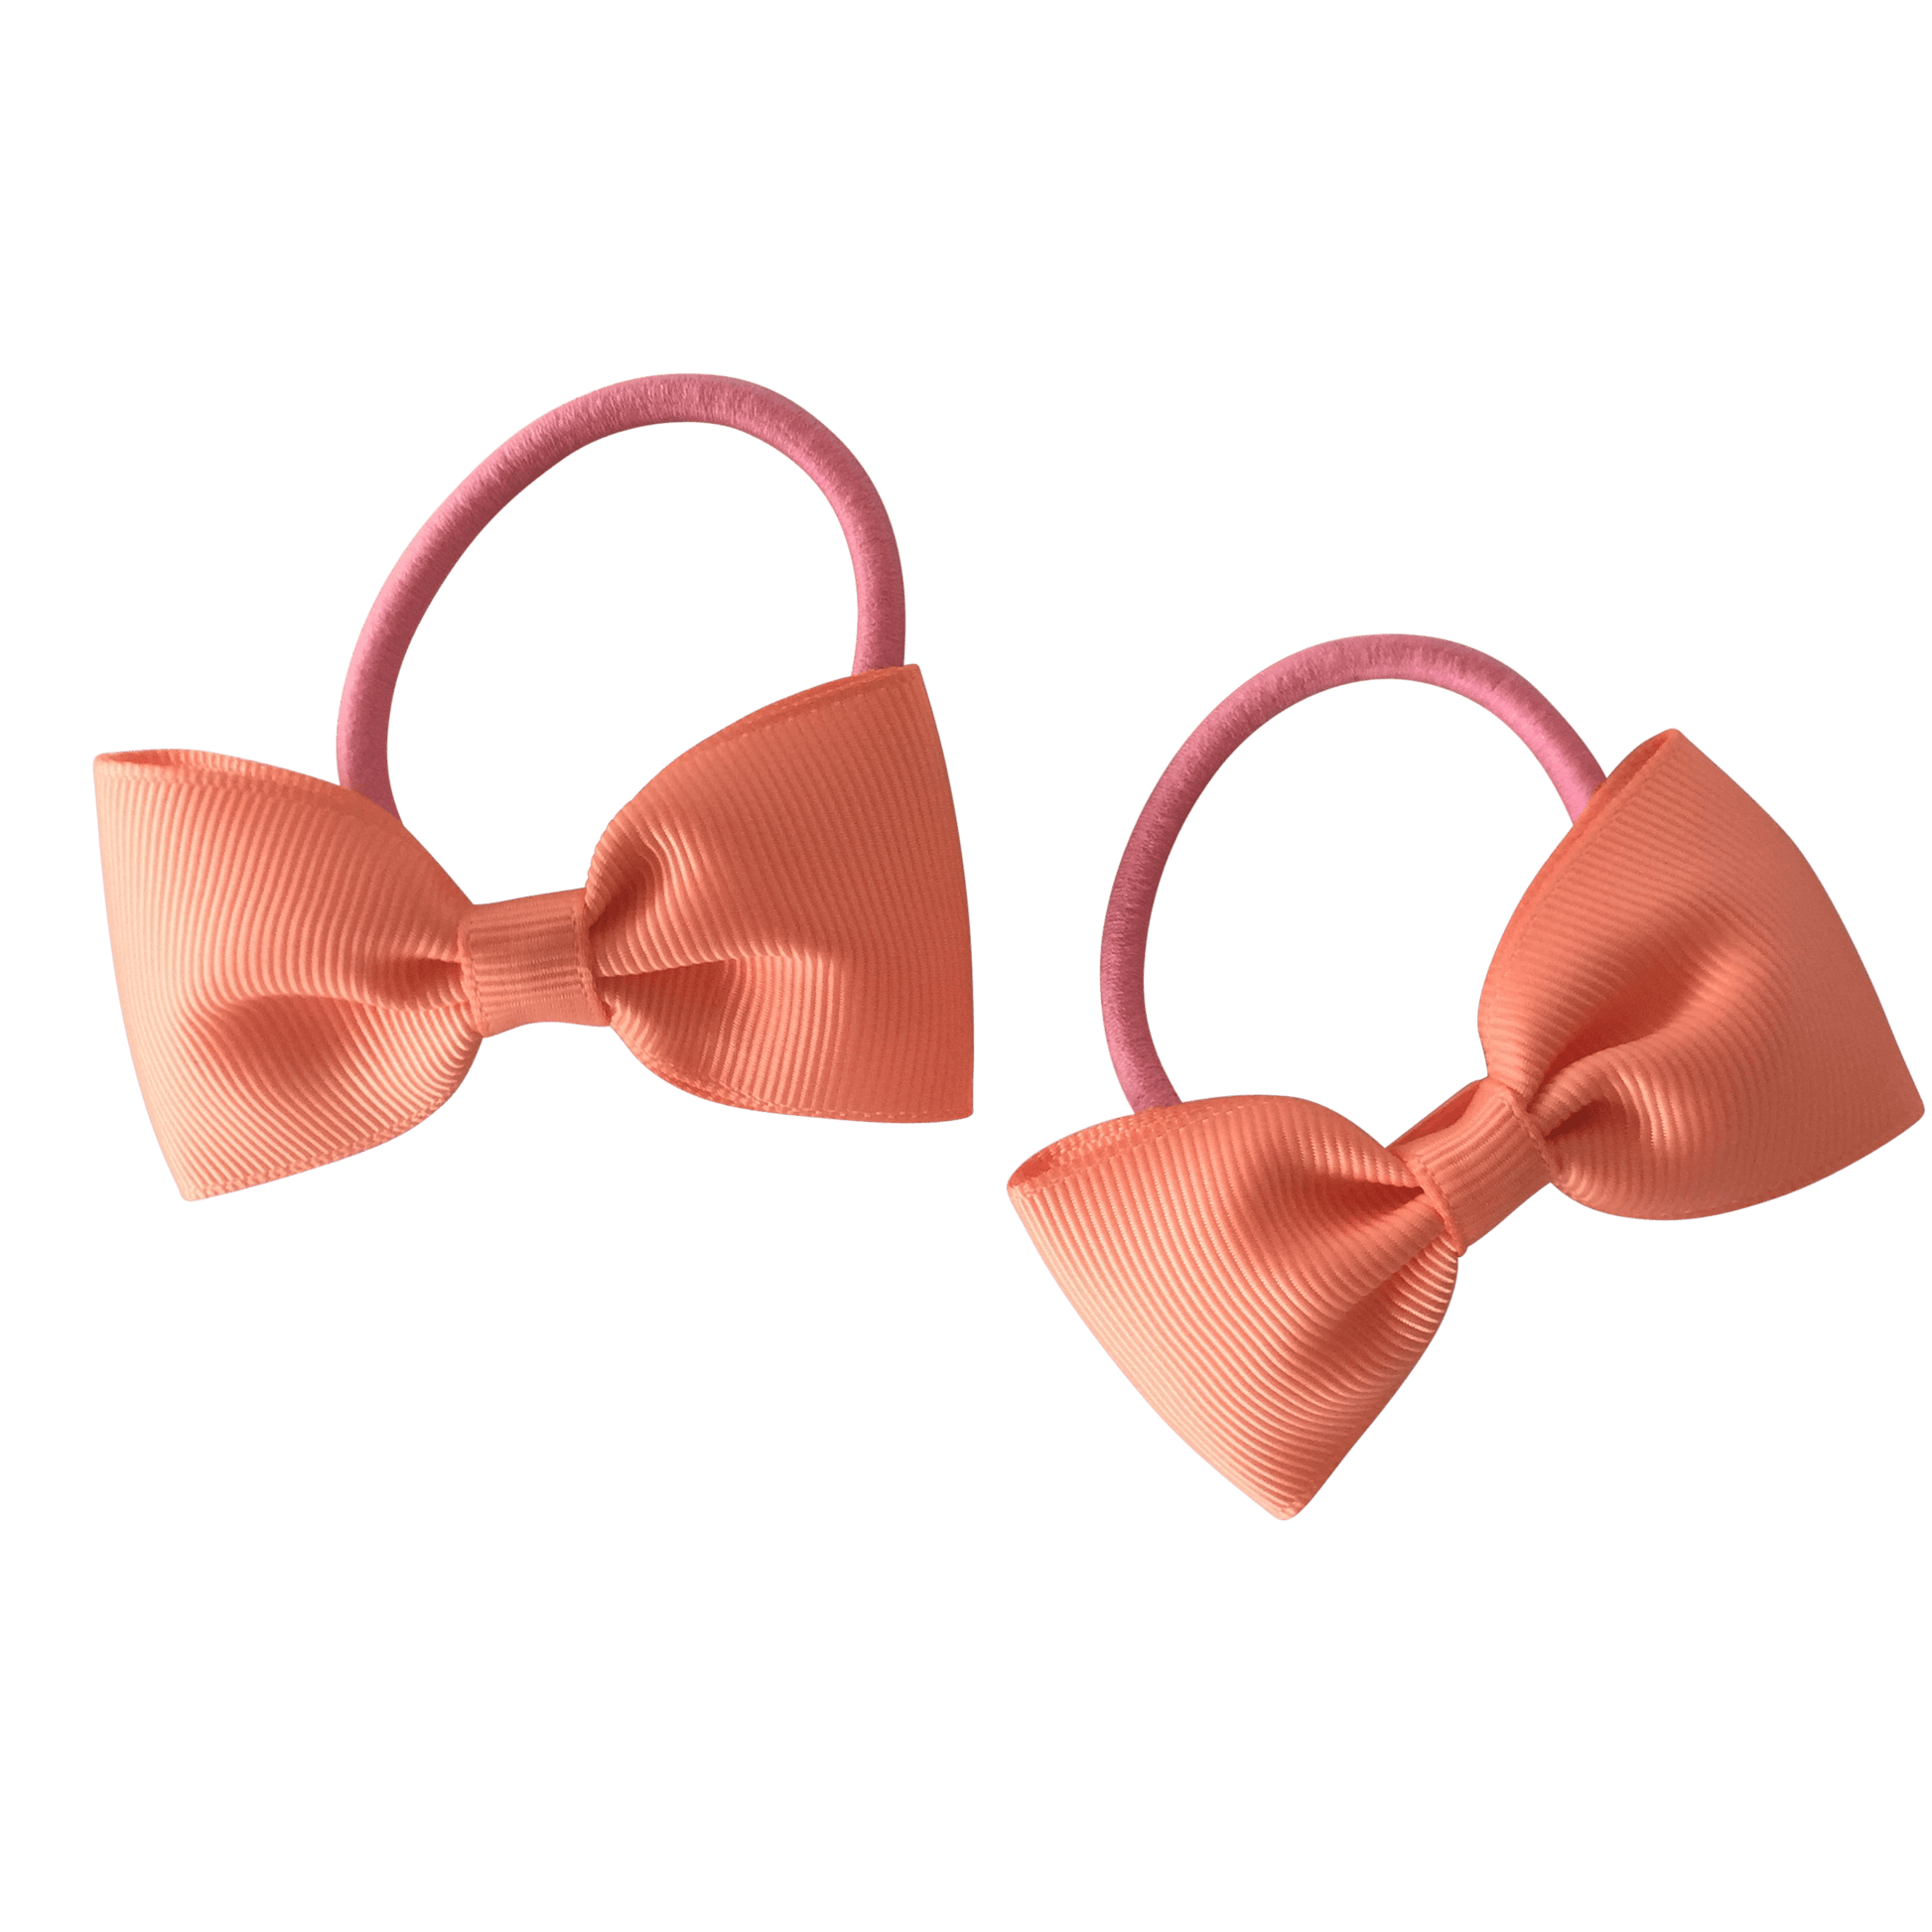 Coral Hair Accessories - Assorted Hair Accessories - School Uniform Hair Accessories - Ponytails and Fairytales